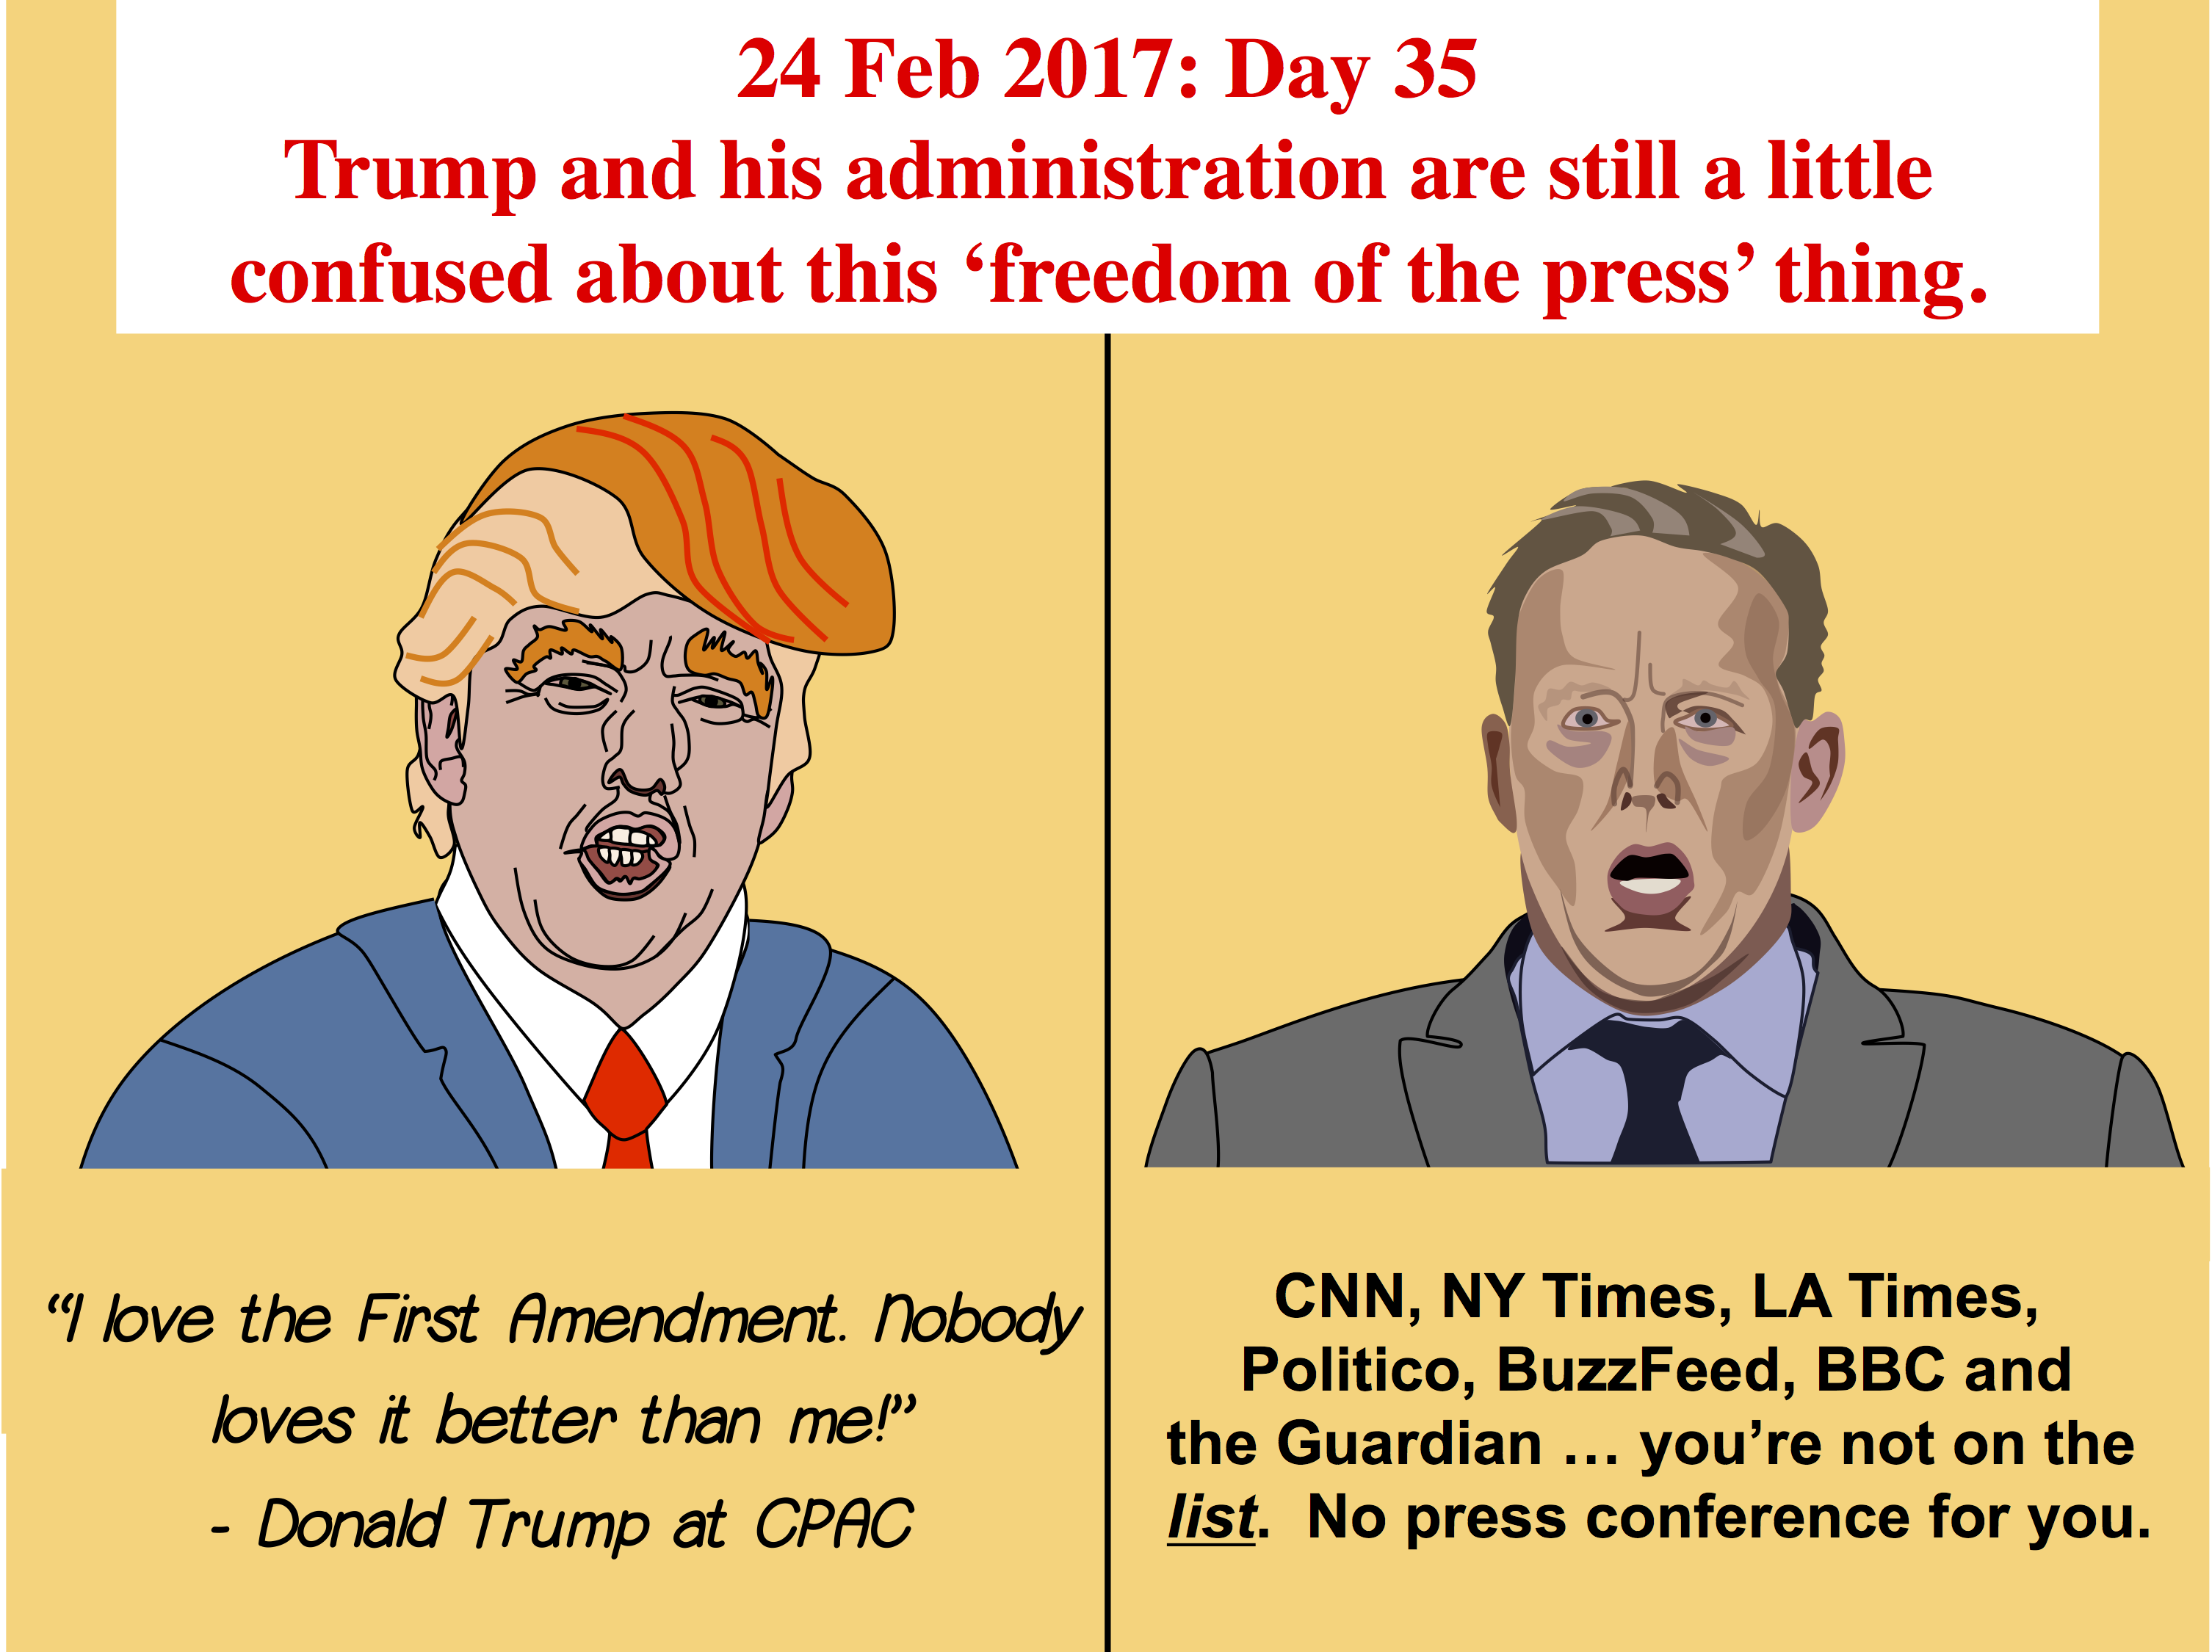 Day 35: Trump and his administration still not clear on Freedom of the Press